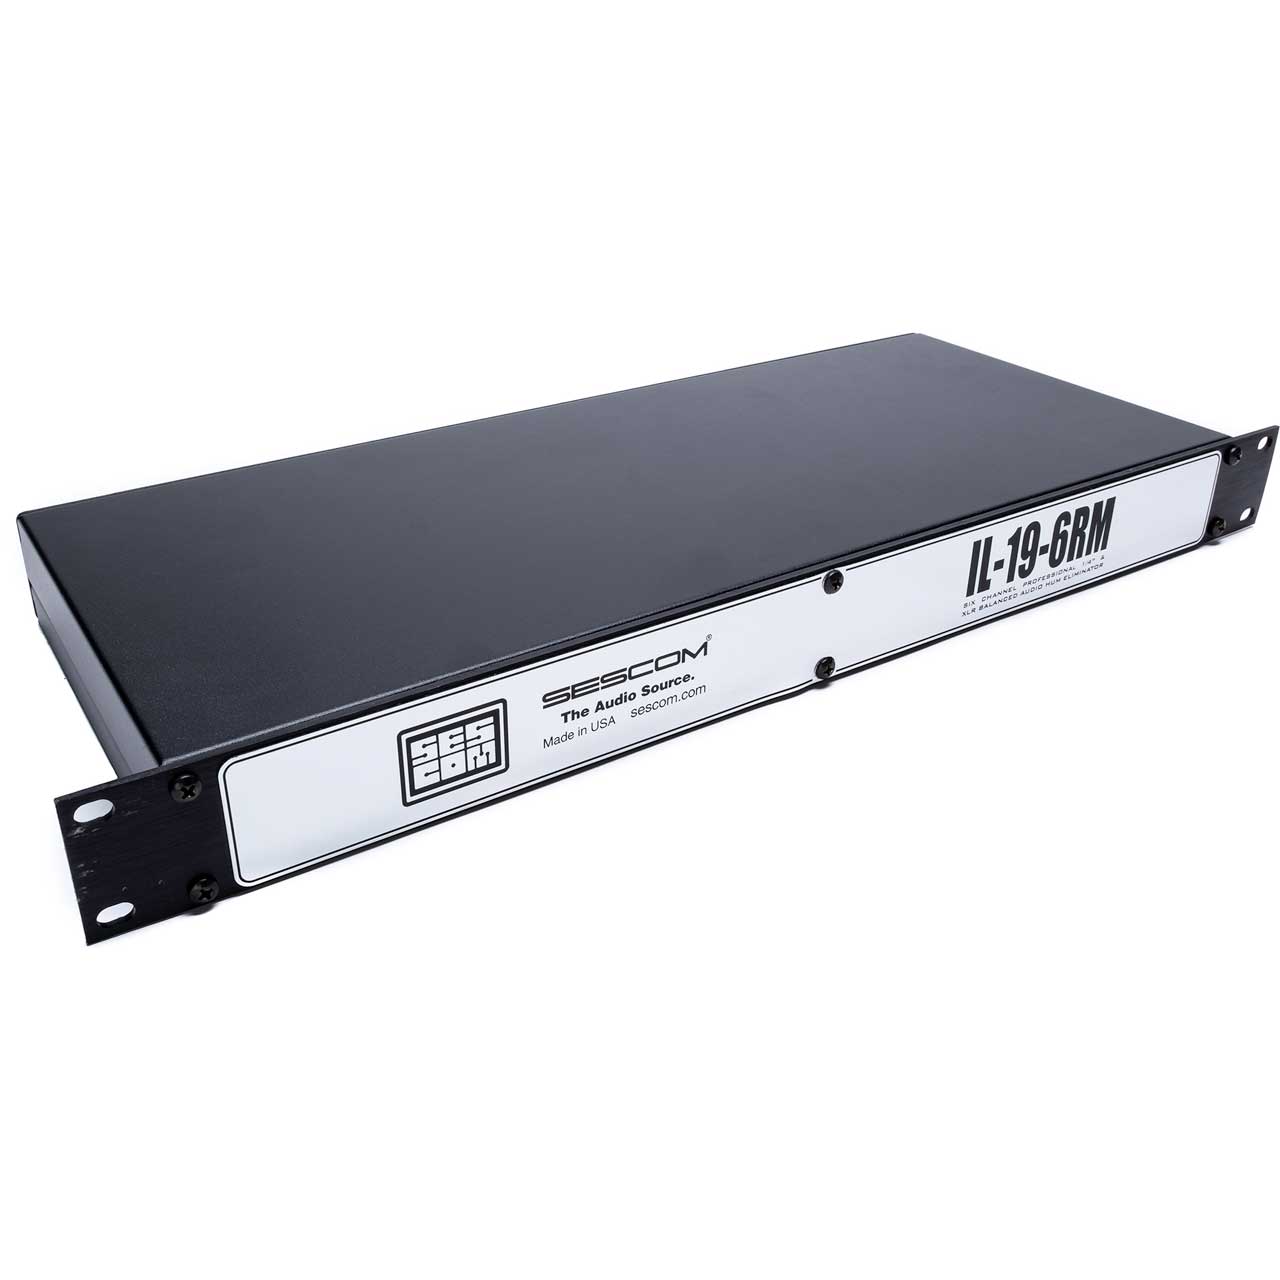 Sescom IL-19-6RM Pro Audio Hum Eliminator 6-Channel Rackmount with Isolation - BStock (Scratch on the Bottom) IL-19-6RM-BS